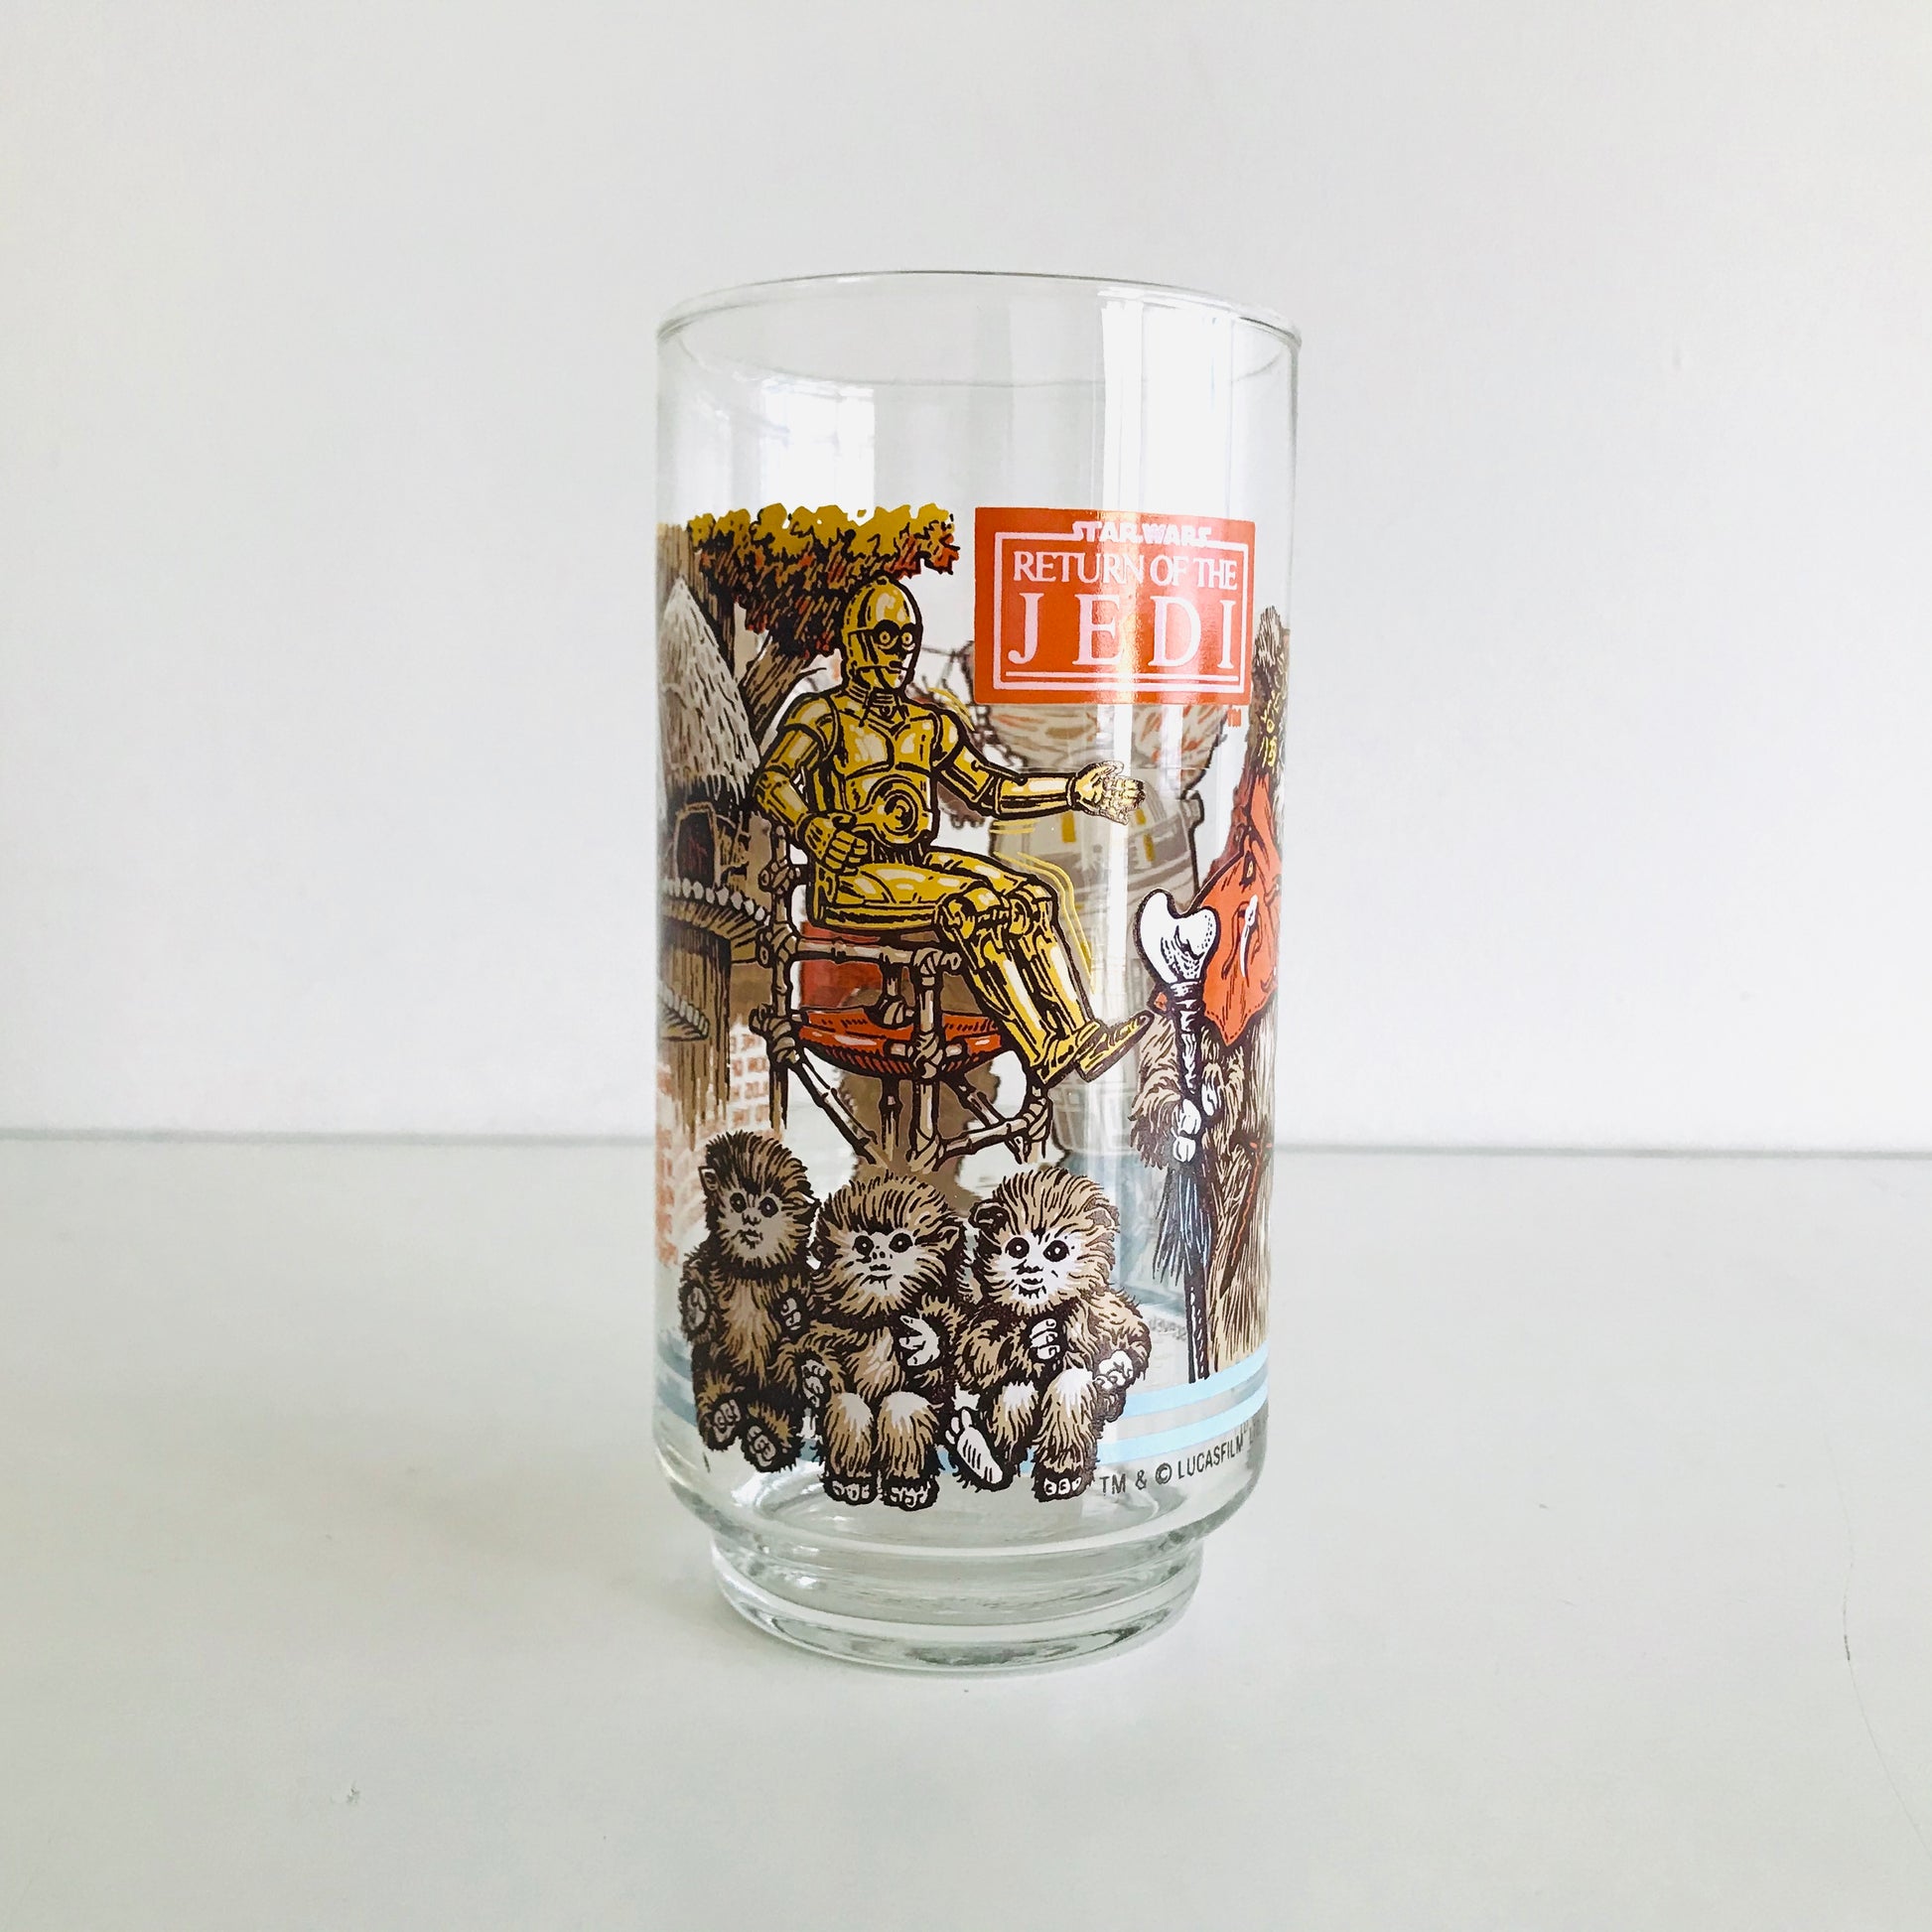 Star Wars glass tumbler graphic of C-3PO levitating from his wooden chair in front of 3 baby Ewoks